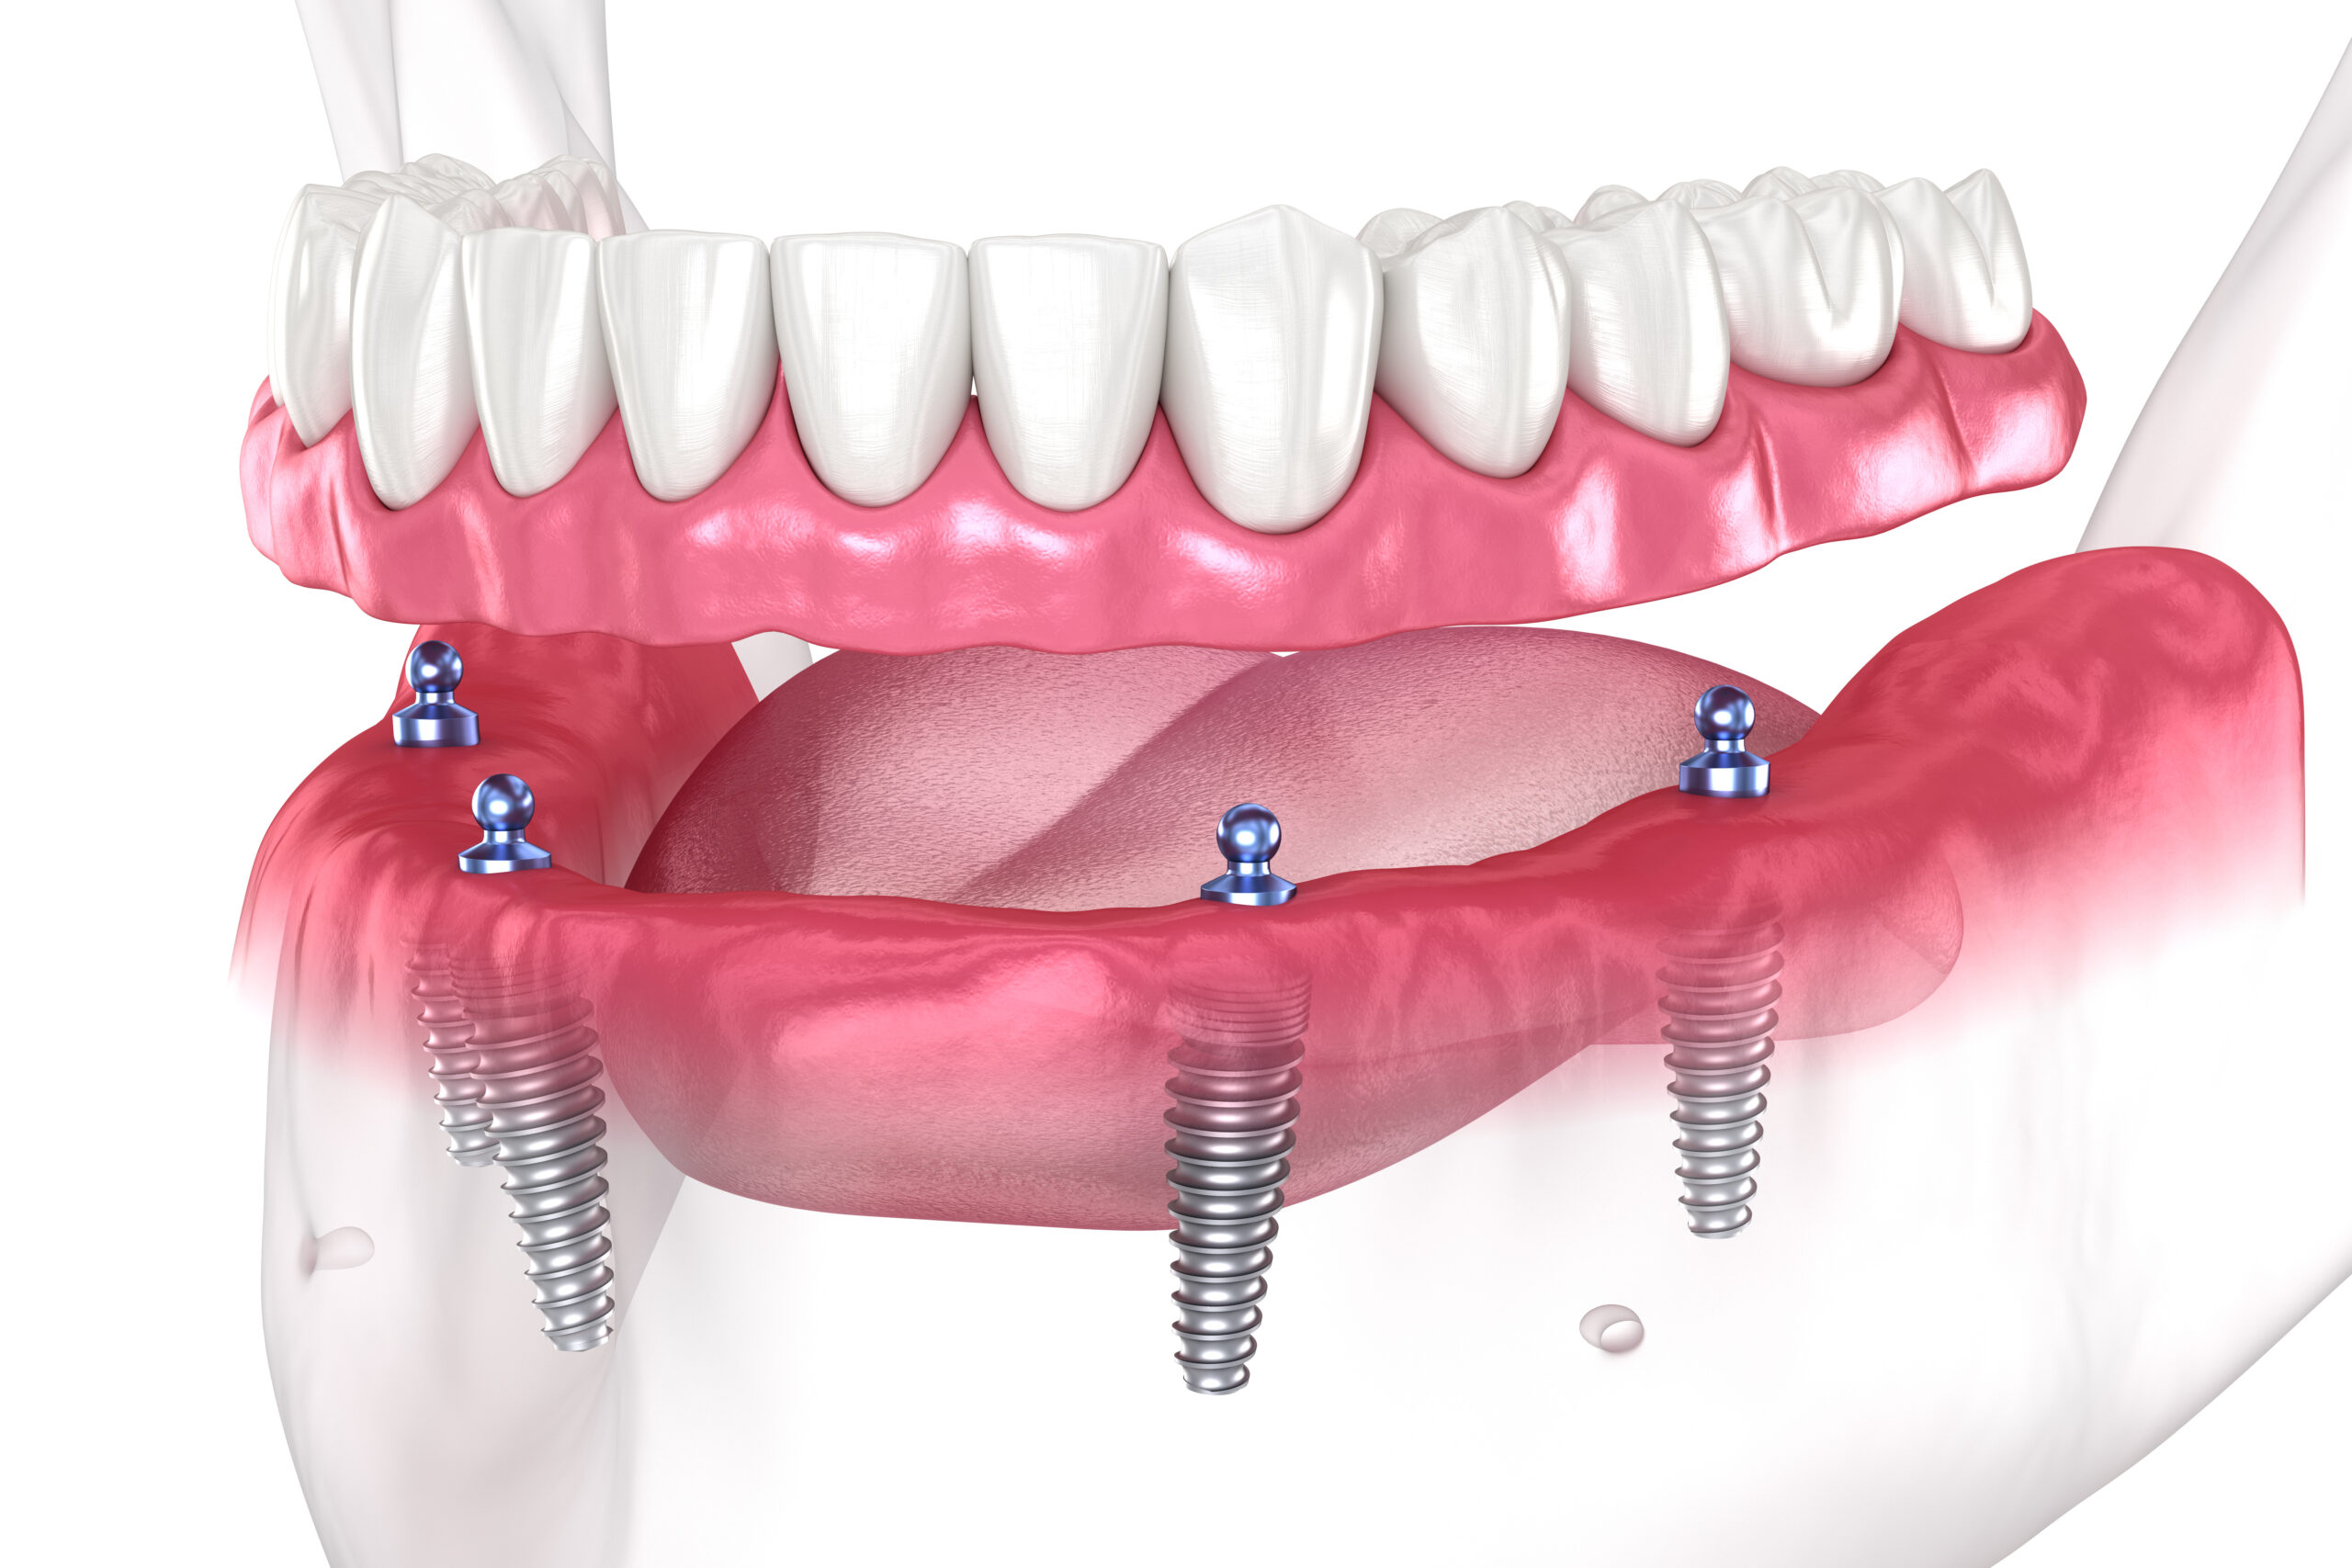 Are There Benefits That Come From Getting Treated With Full Mouth Dental Implants In Oregon City, OR?